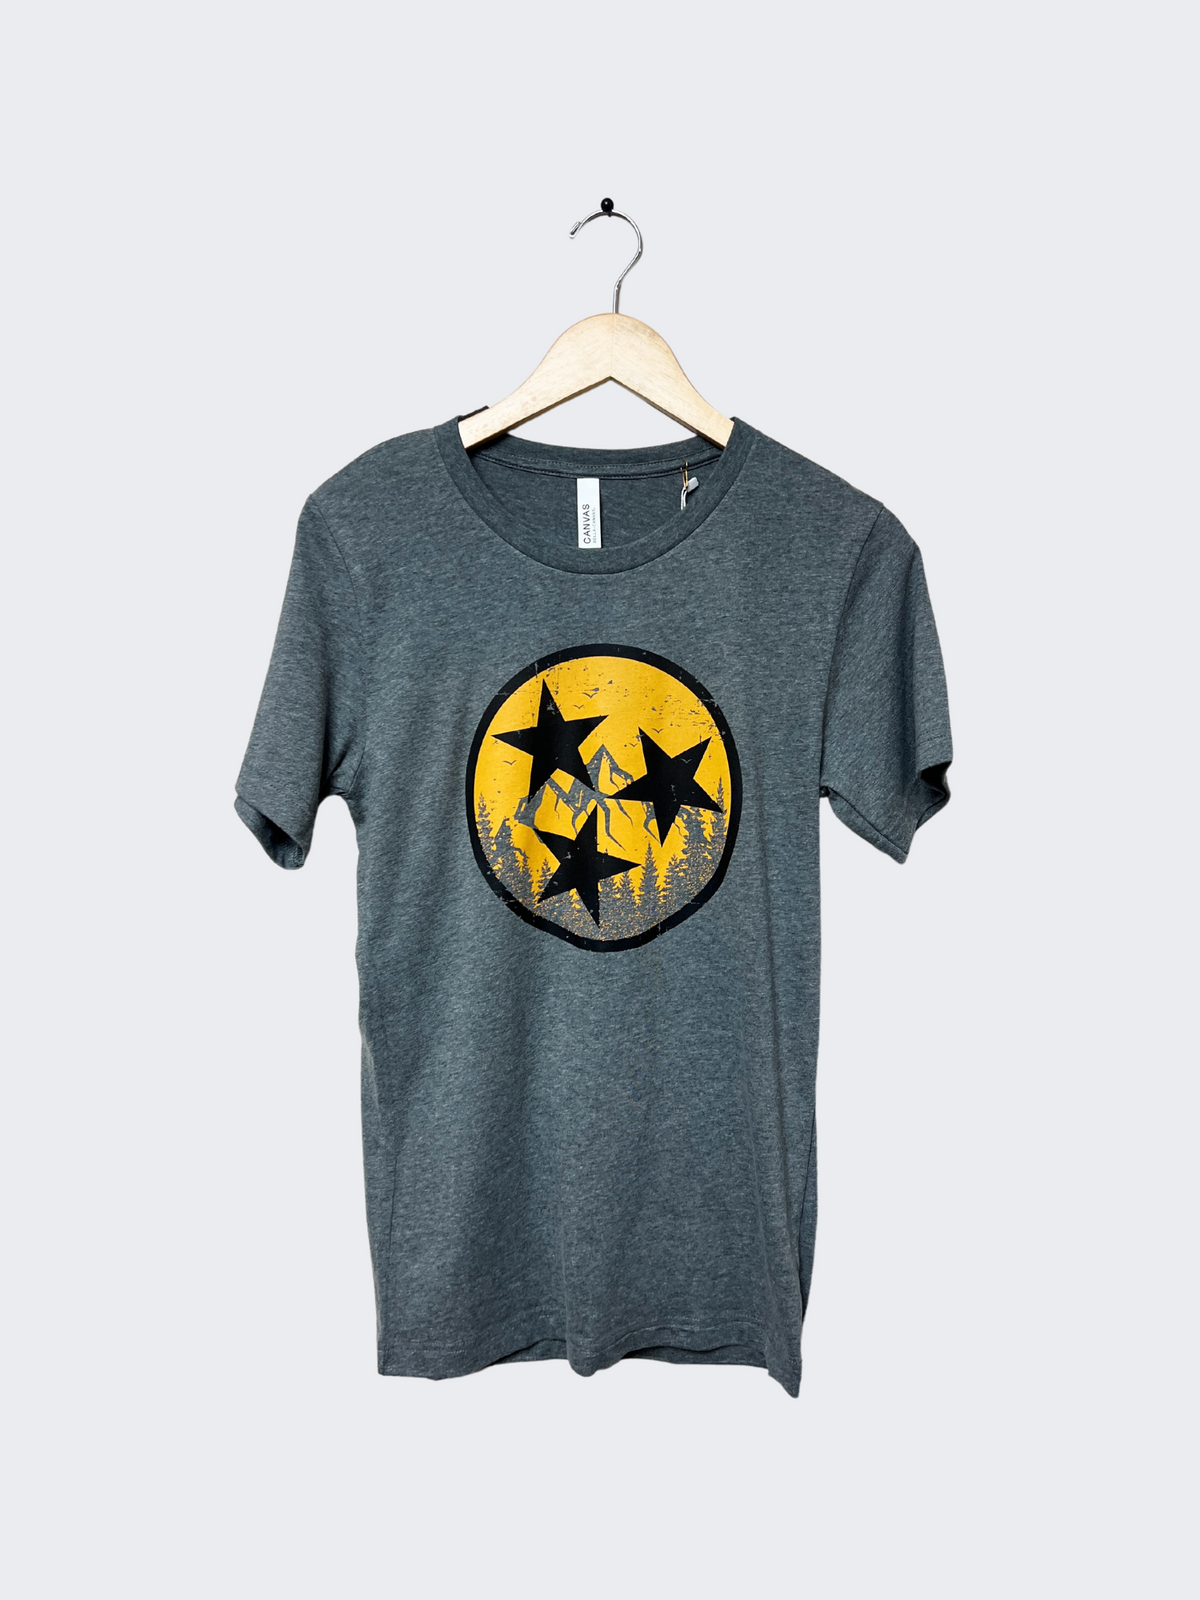 tennessee mountains tri star graphic tee in grey-front view